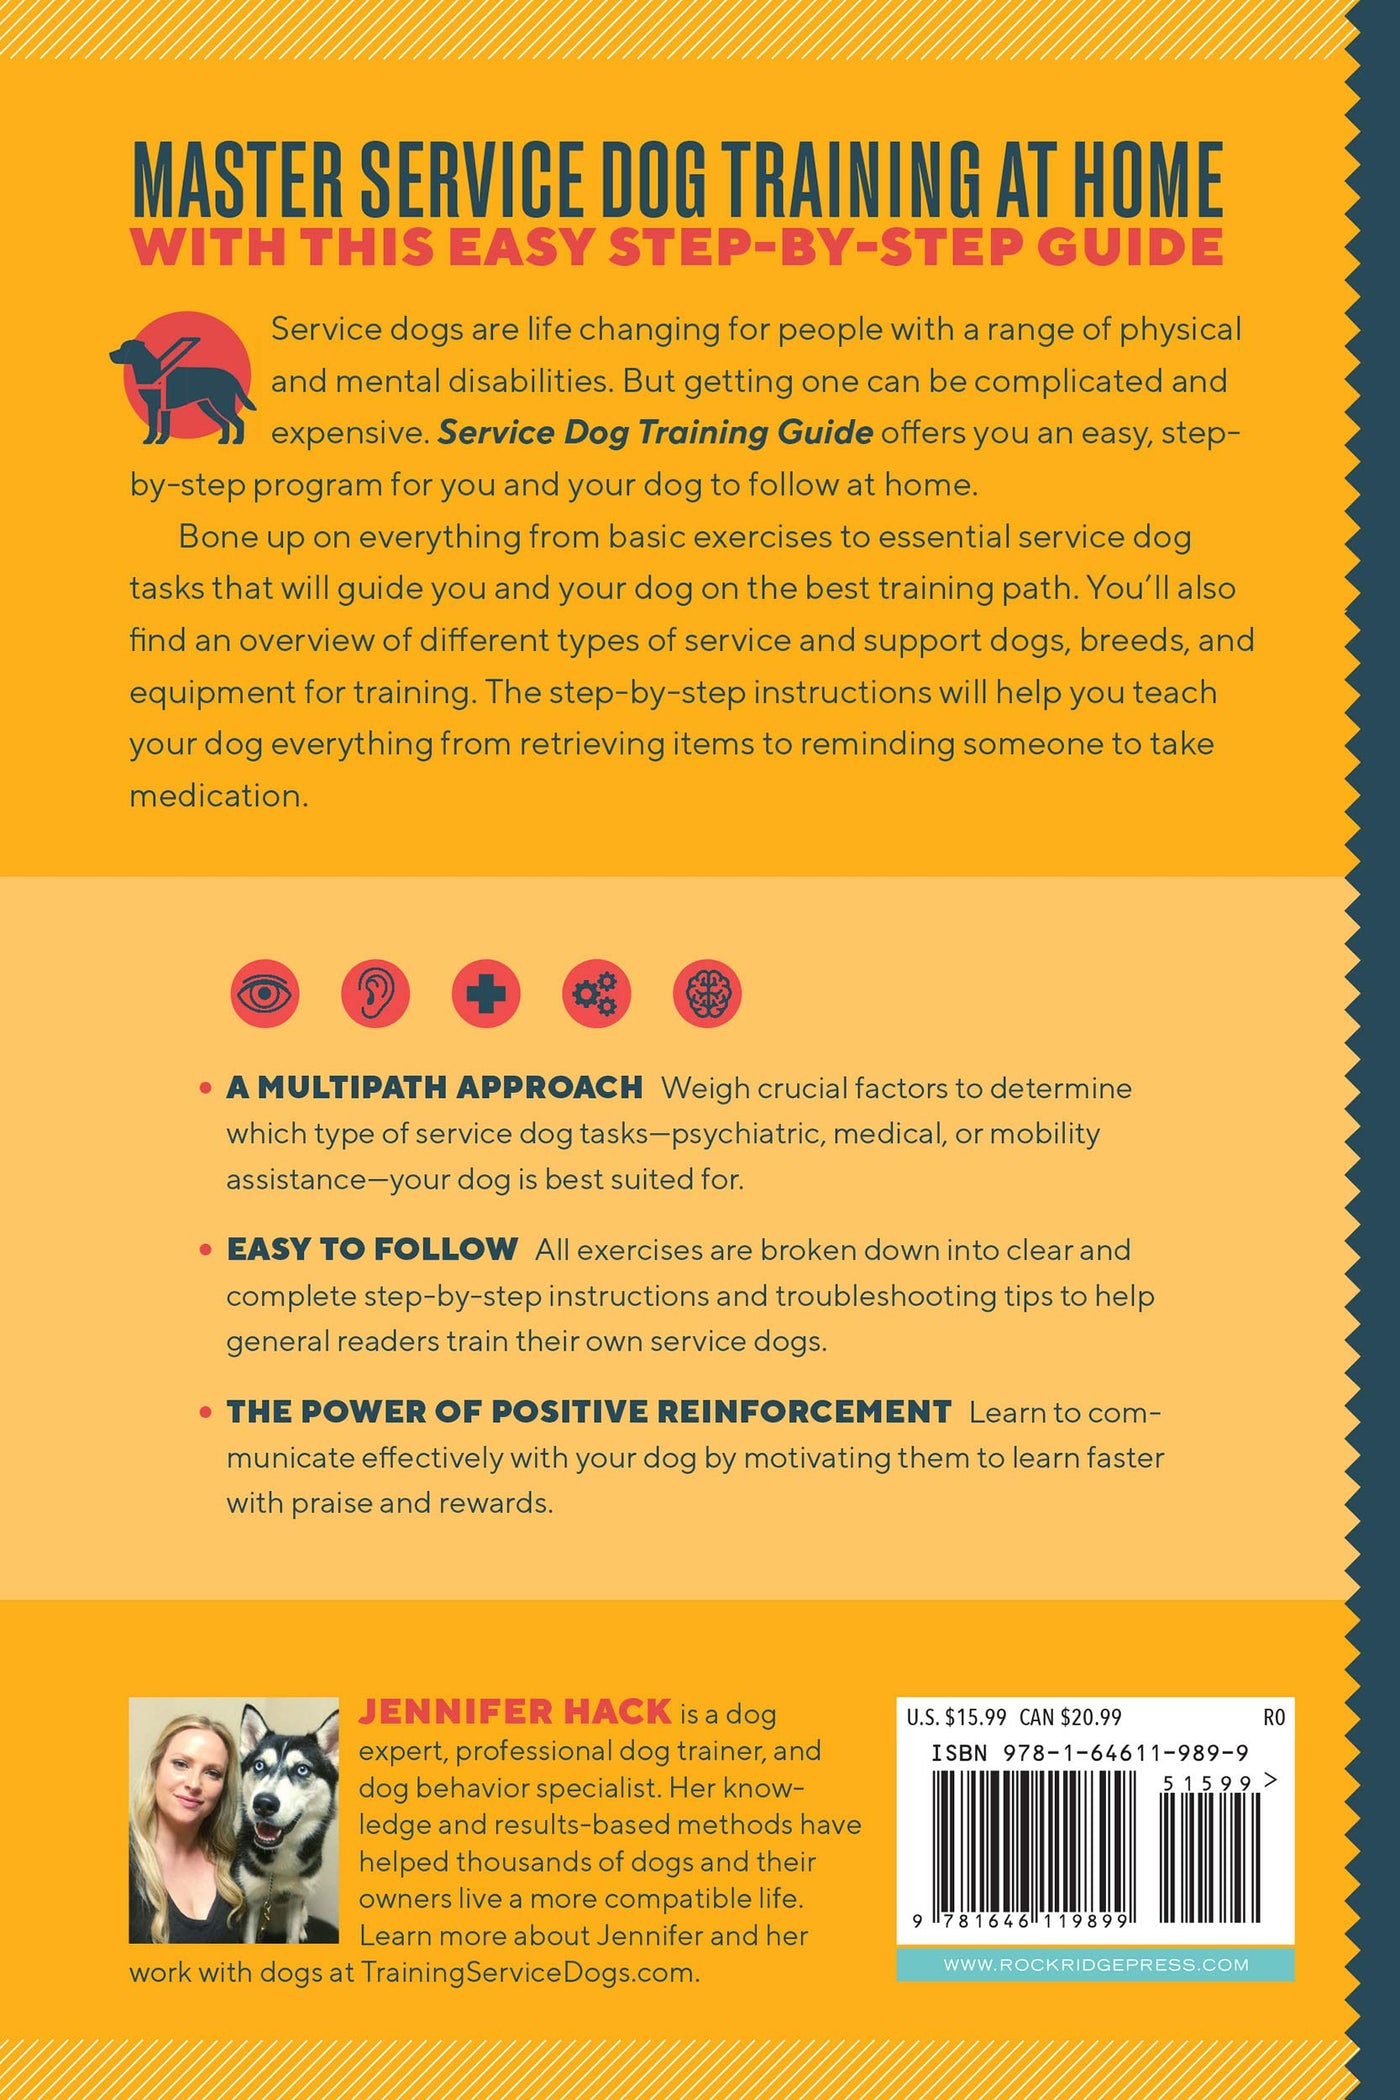 Service Dog Training Guide: A Step-by-Step Training Program for You and Your Dog (Spiral Bound)